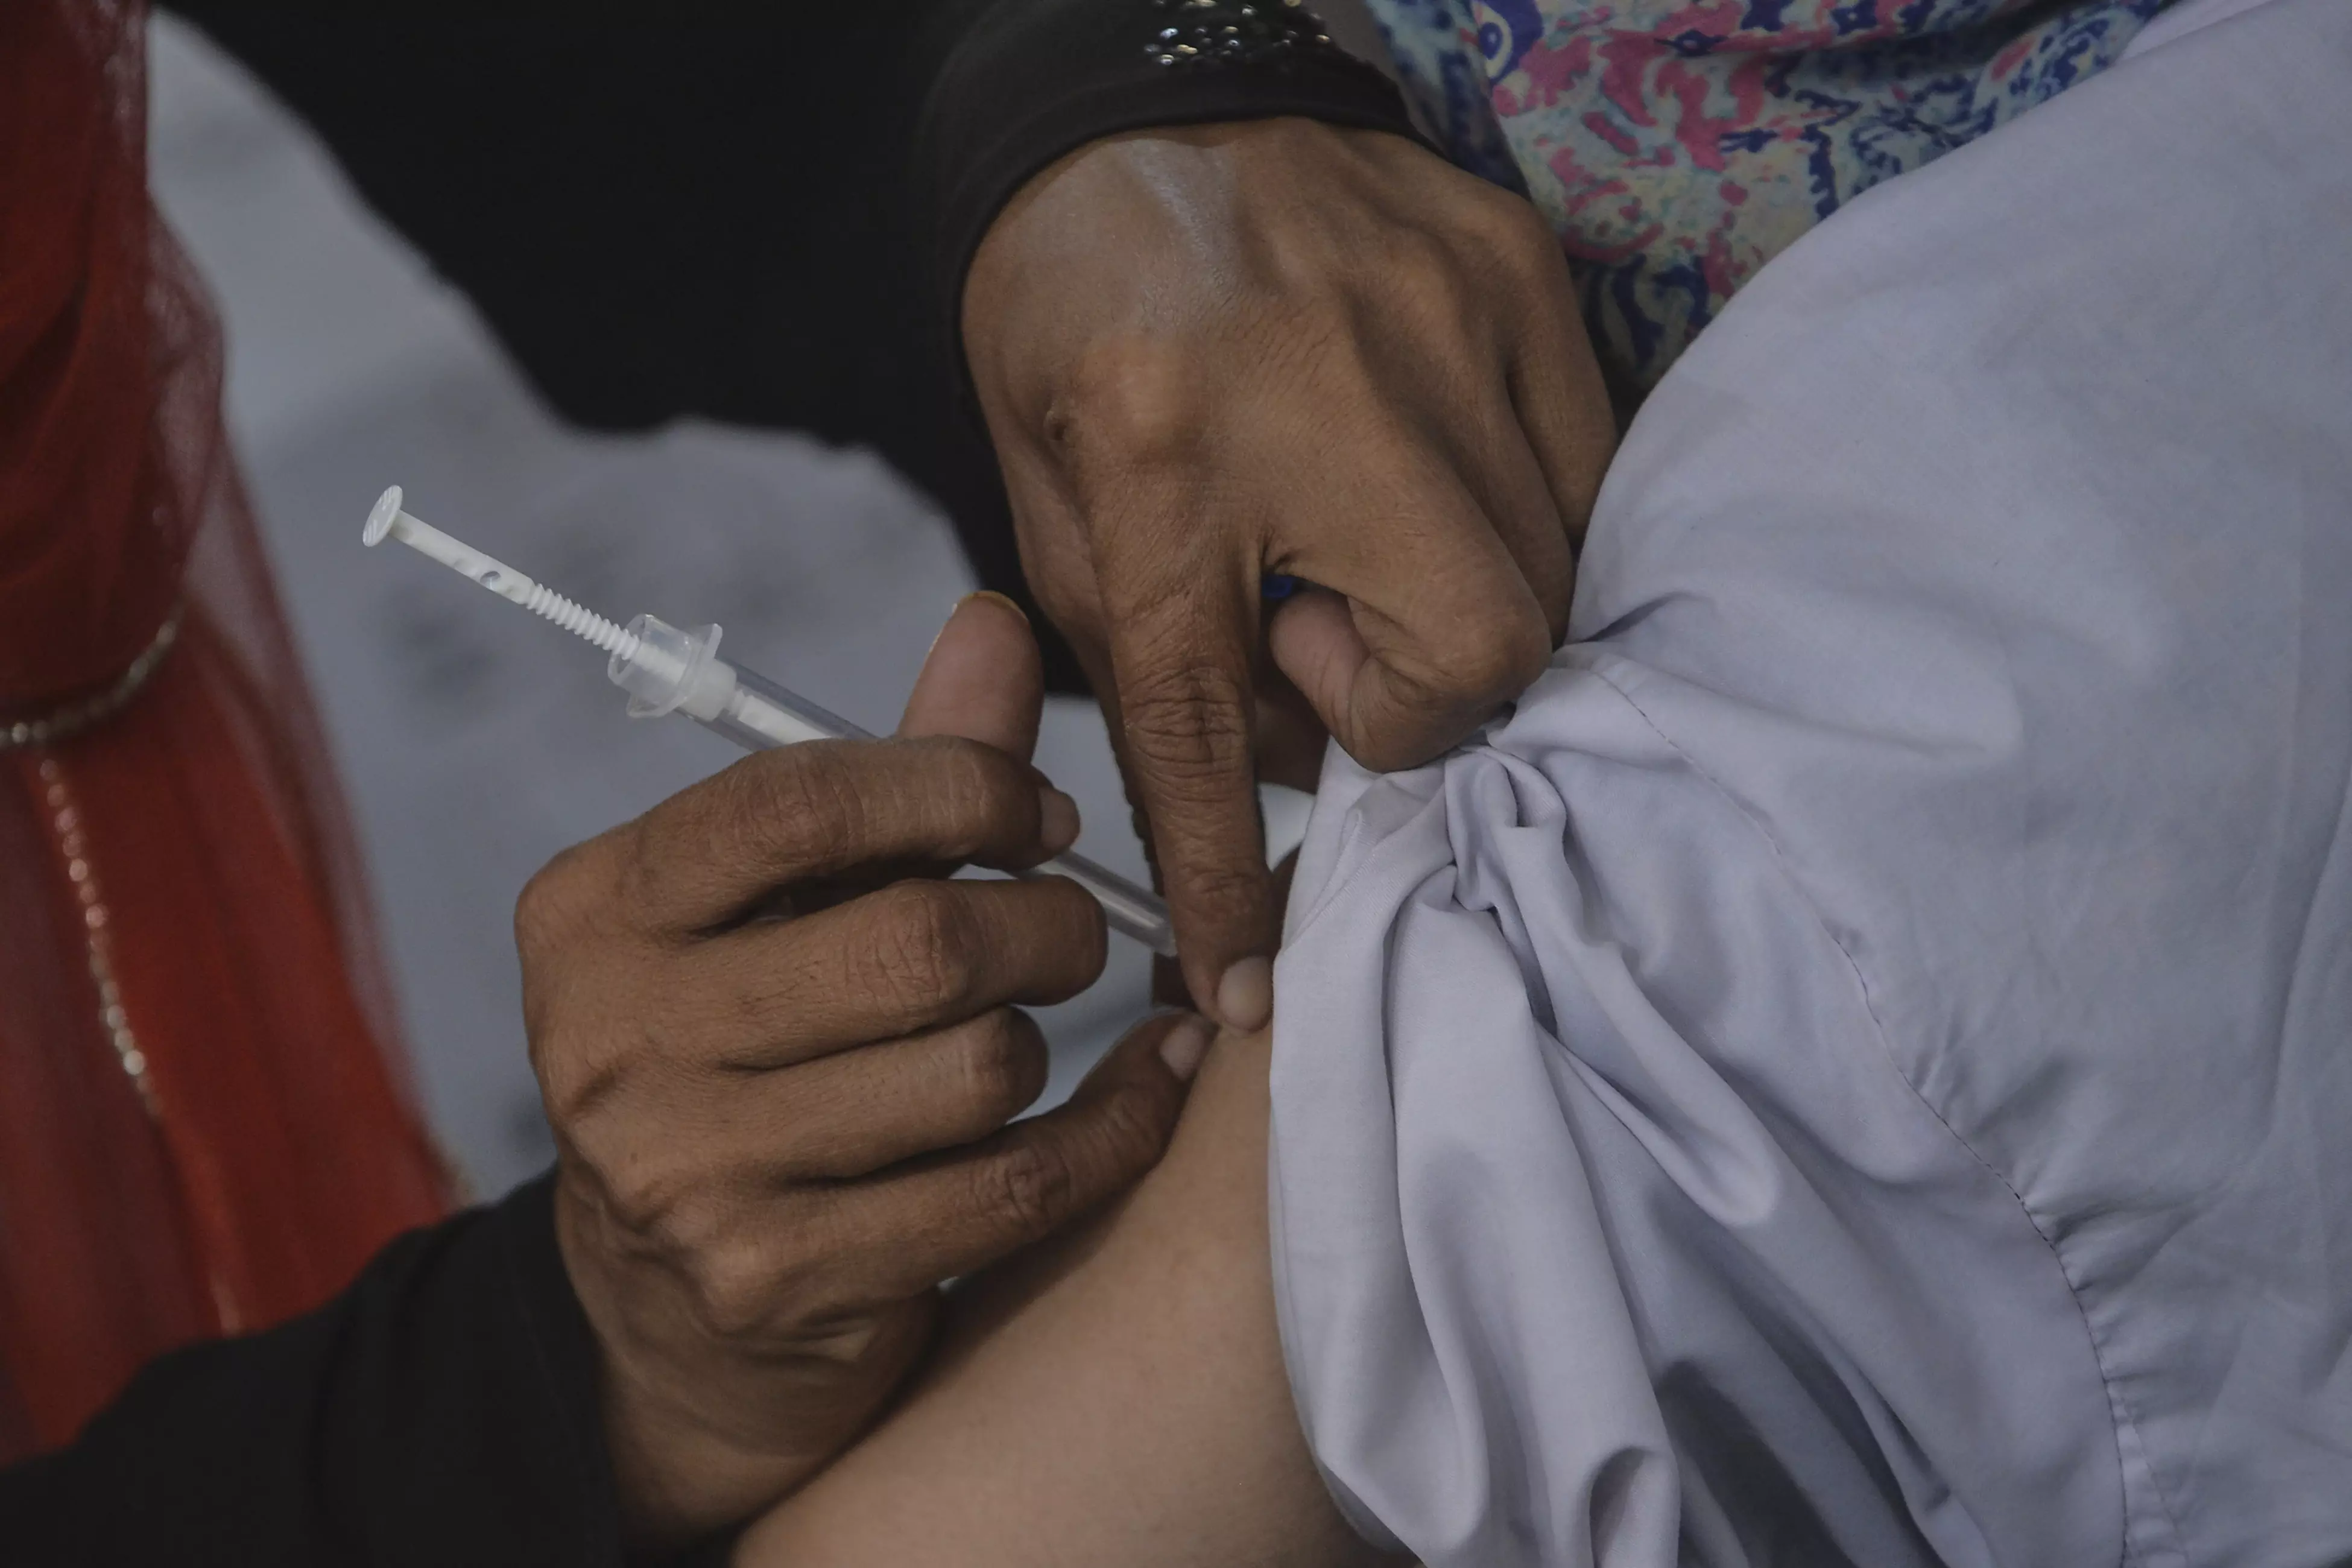 2016 Video Used To Show Covid-19 Vaccine Killed 6 Children in Pakistan